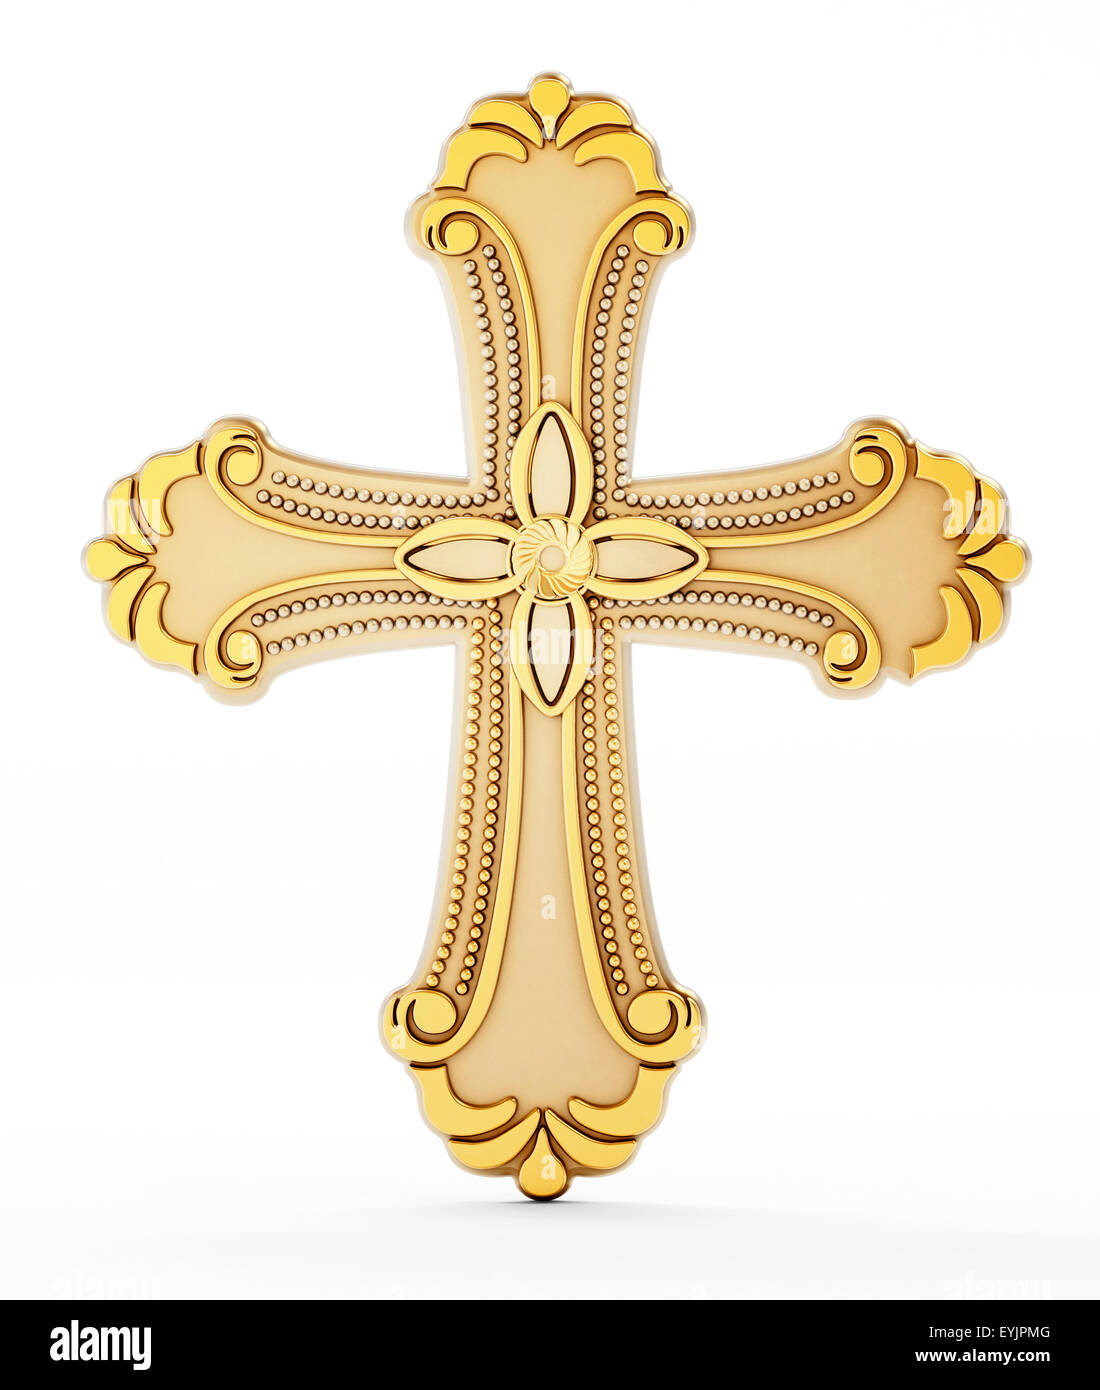 Gold cross isolated on white background. Stock Photo